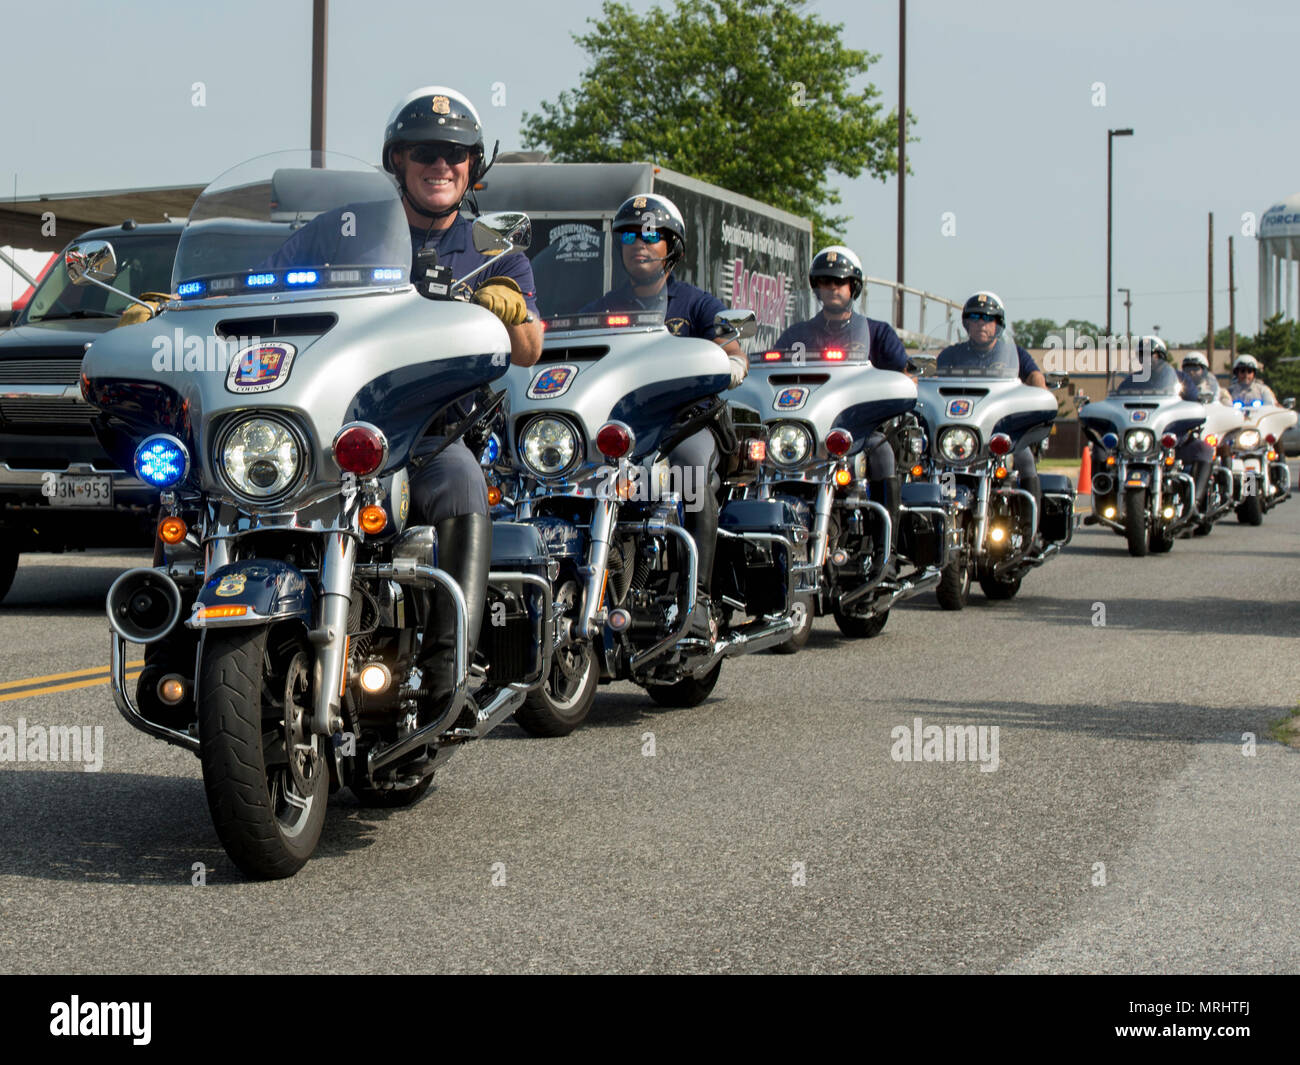 Prince George’s County policemen ride in formation during the Seventh Annual Motorcycle Safety Day at Joint Base Andrews, Md., June 15, 2017. This year’s MSD was considerably larger compared to previous years and was supported by more than five law enforcement departments, including the Anne Arundel County Police, Virginia State Police and Prince George’s County Sheriff’s Department. (U.S. Air Force photo by Airman 1st Class Valentina Lopez) Stock Photo